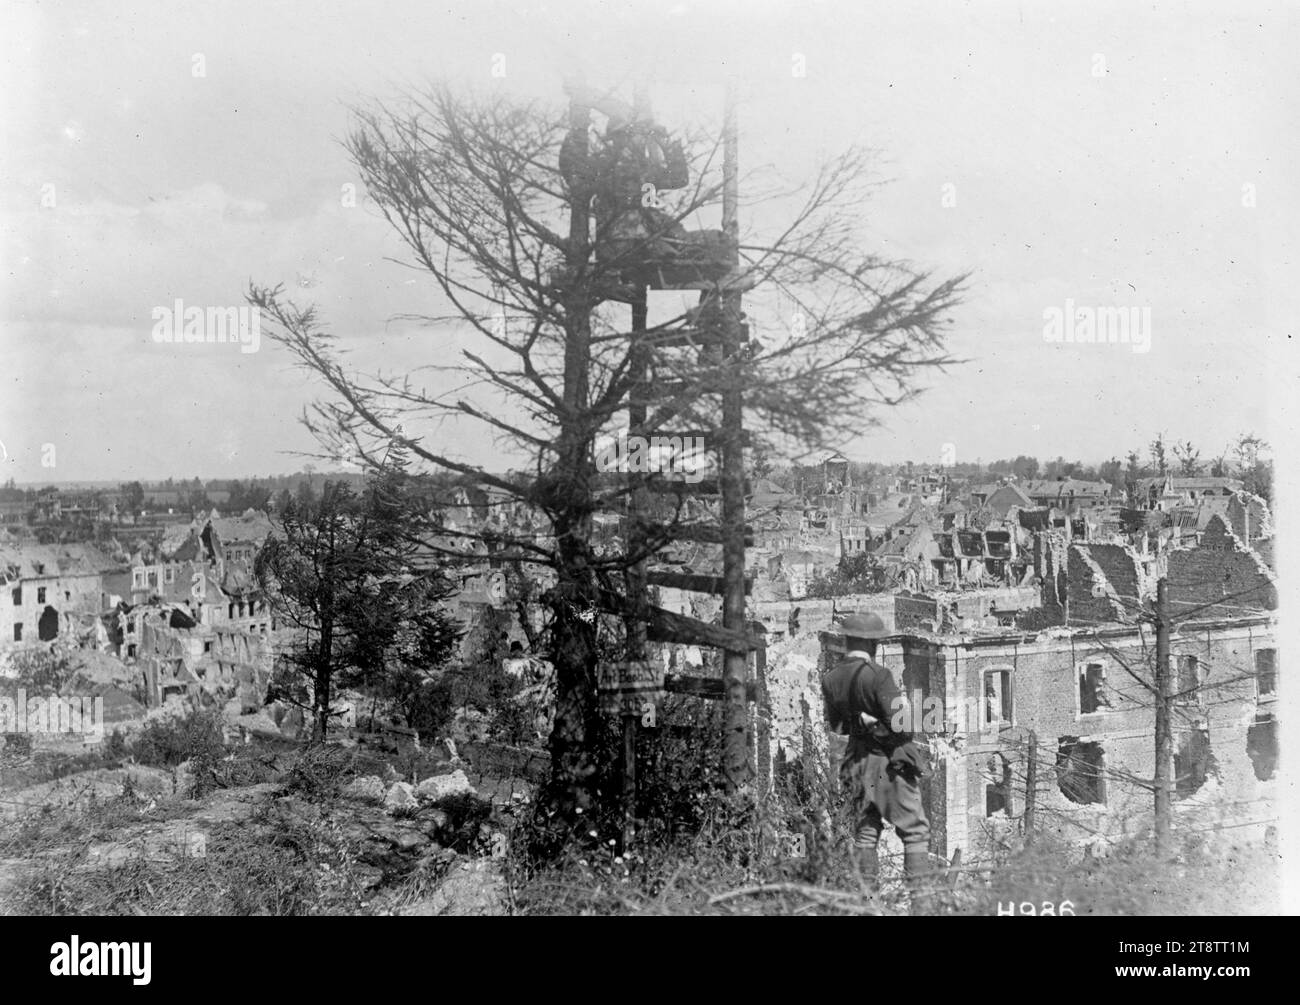 A German Artillery observation post in Bapaume, World War I, A wooden German artillery observation post among trees on high ground overlooking Bapaume, after the town's capture in the Battle of Bapaume. A New Zealand soldier looks at the wide view from the top of the post and another soldier looks over the ruined town from the foot of it. Photograph taken 29 August 1918 Stock Photo